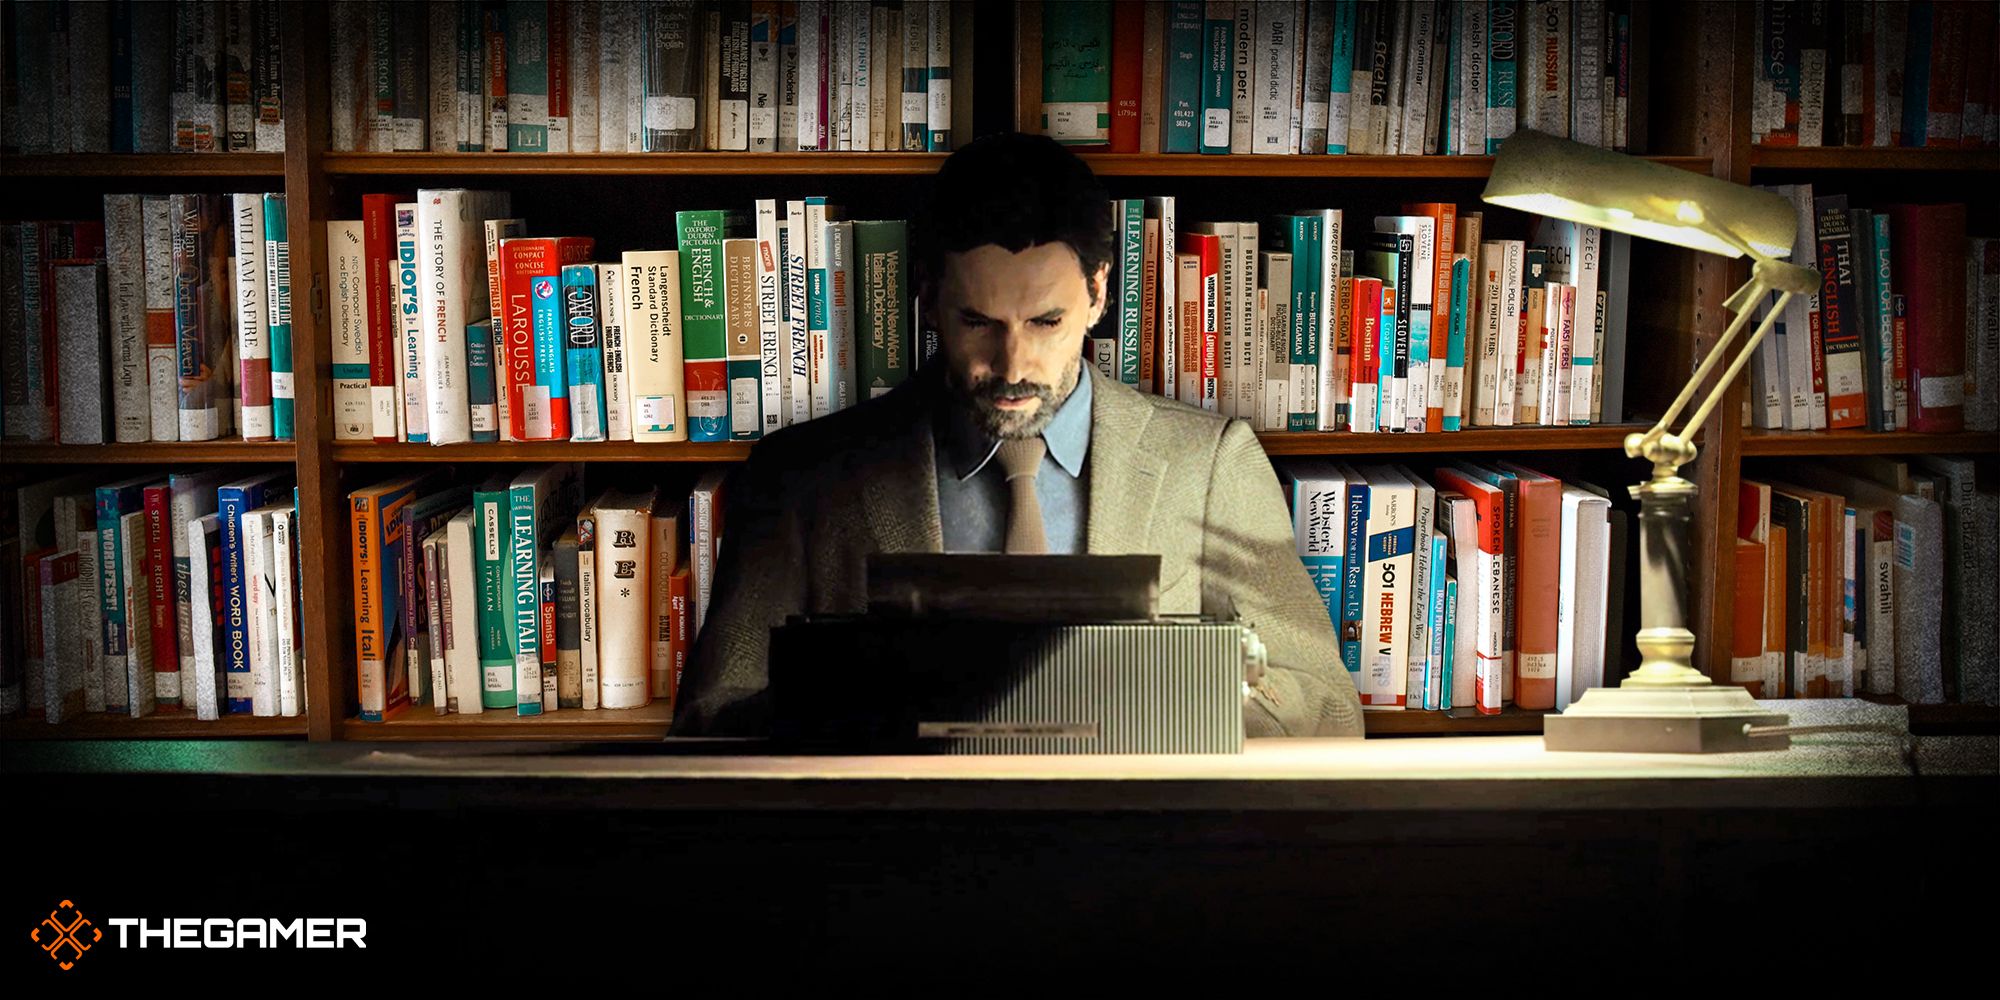 Alan Wake from Alan Wake 2 sitting at his desk reading something with a desk lamp to his left. There s a bookshelf full of books behind him.